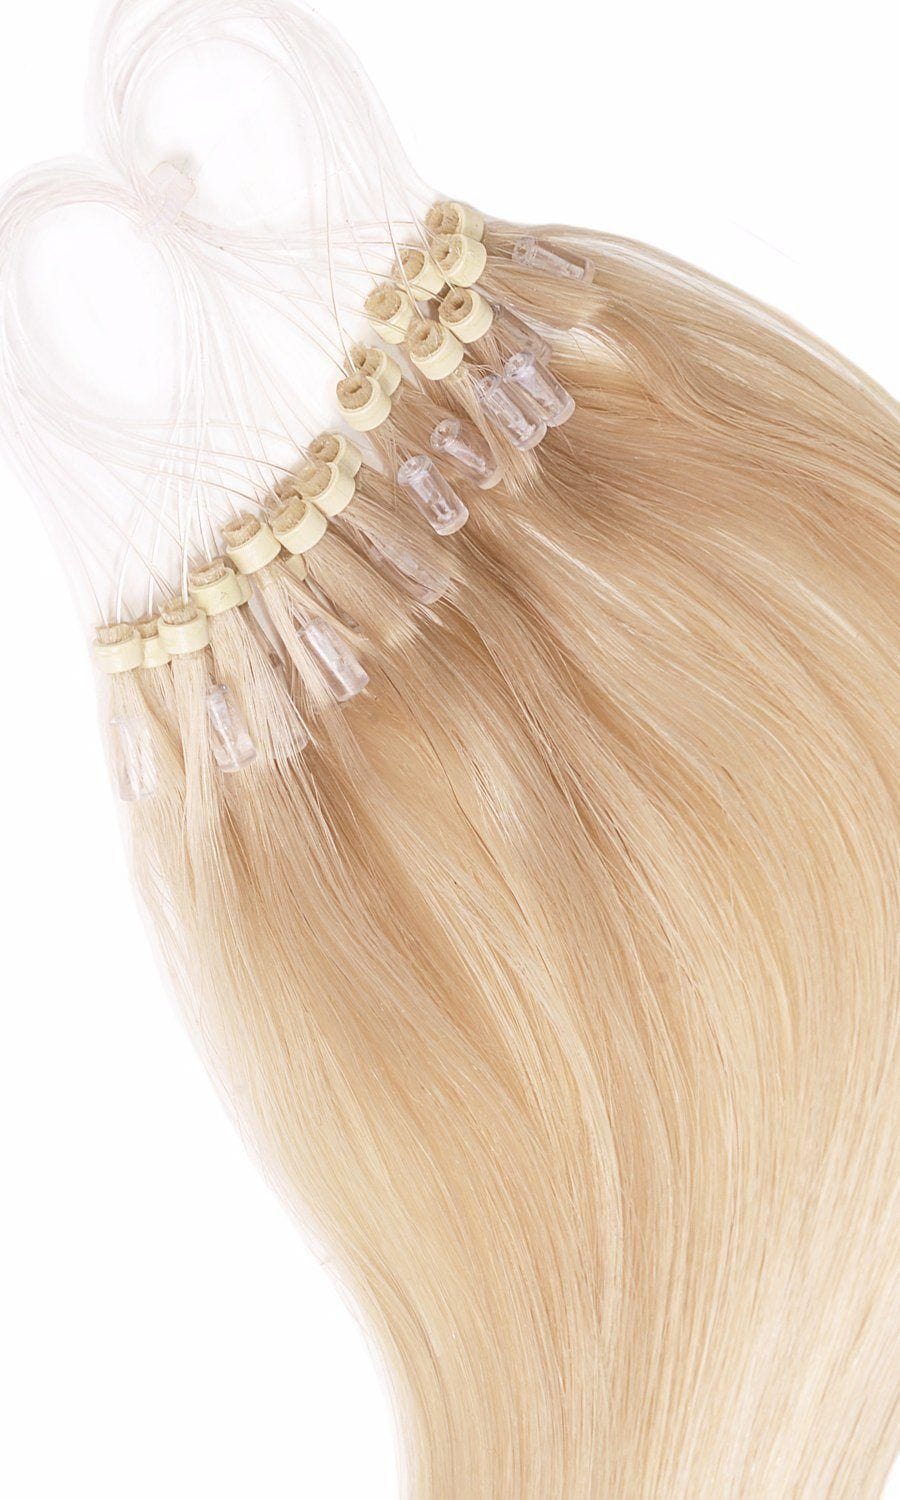 Pro Deluxe Microring Hair Extensions - Honigblond 